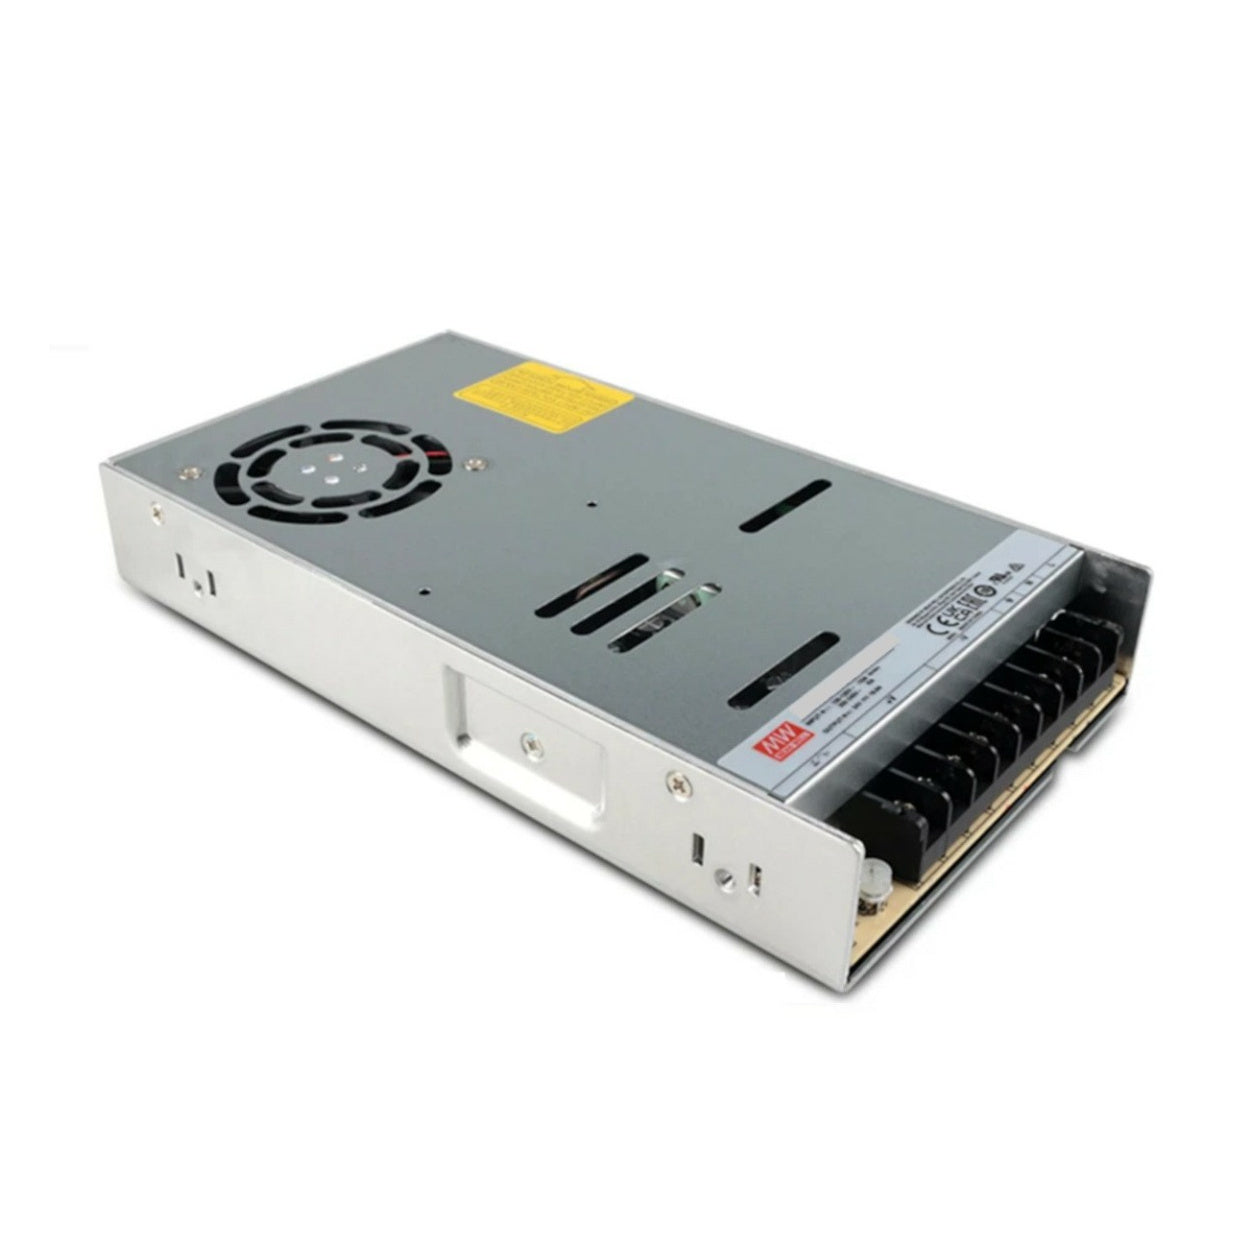 LRS-450-12 Mean Well SMPS 12V 37.5A- 450W Industrial metal Power Supply | Reliable Performance voltkart